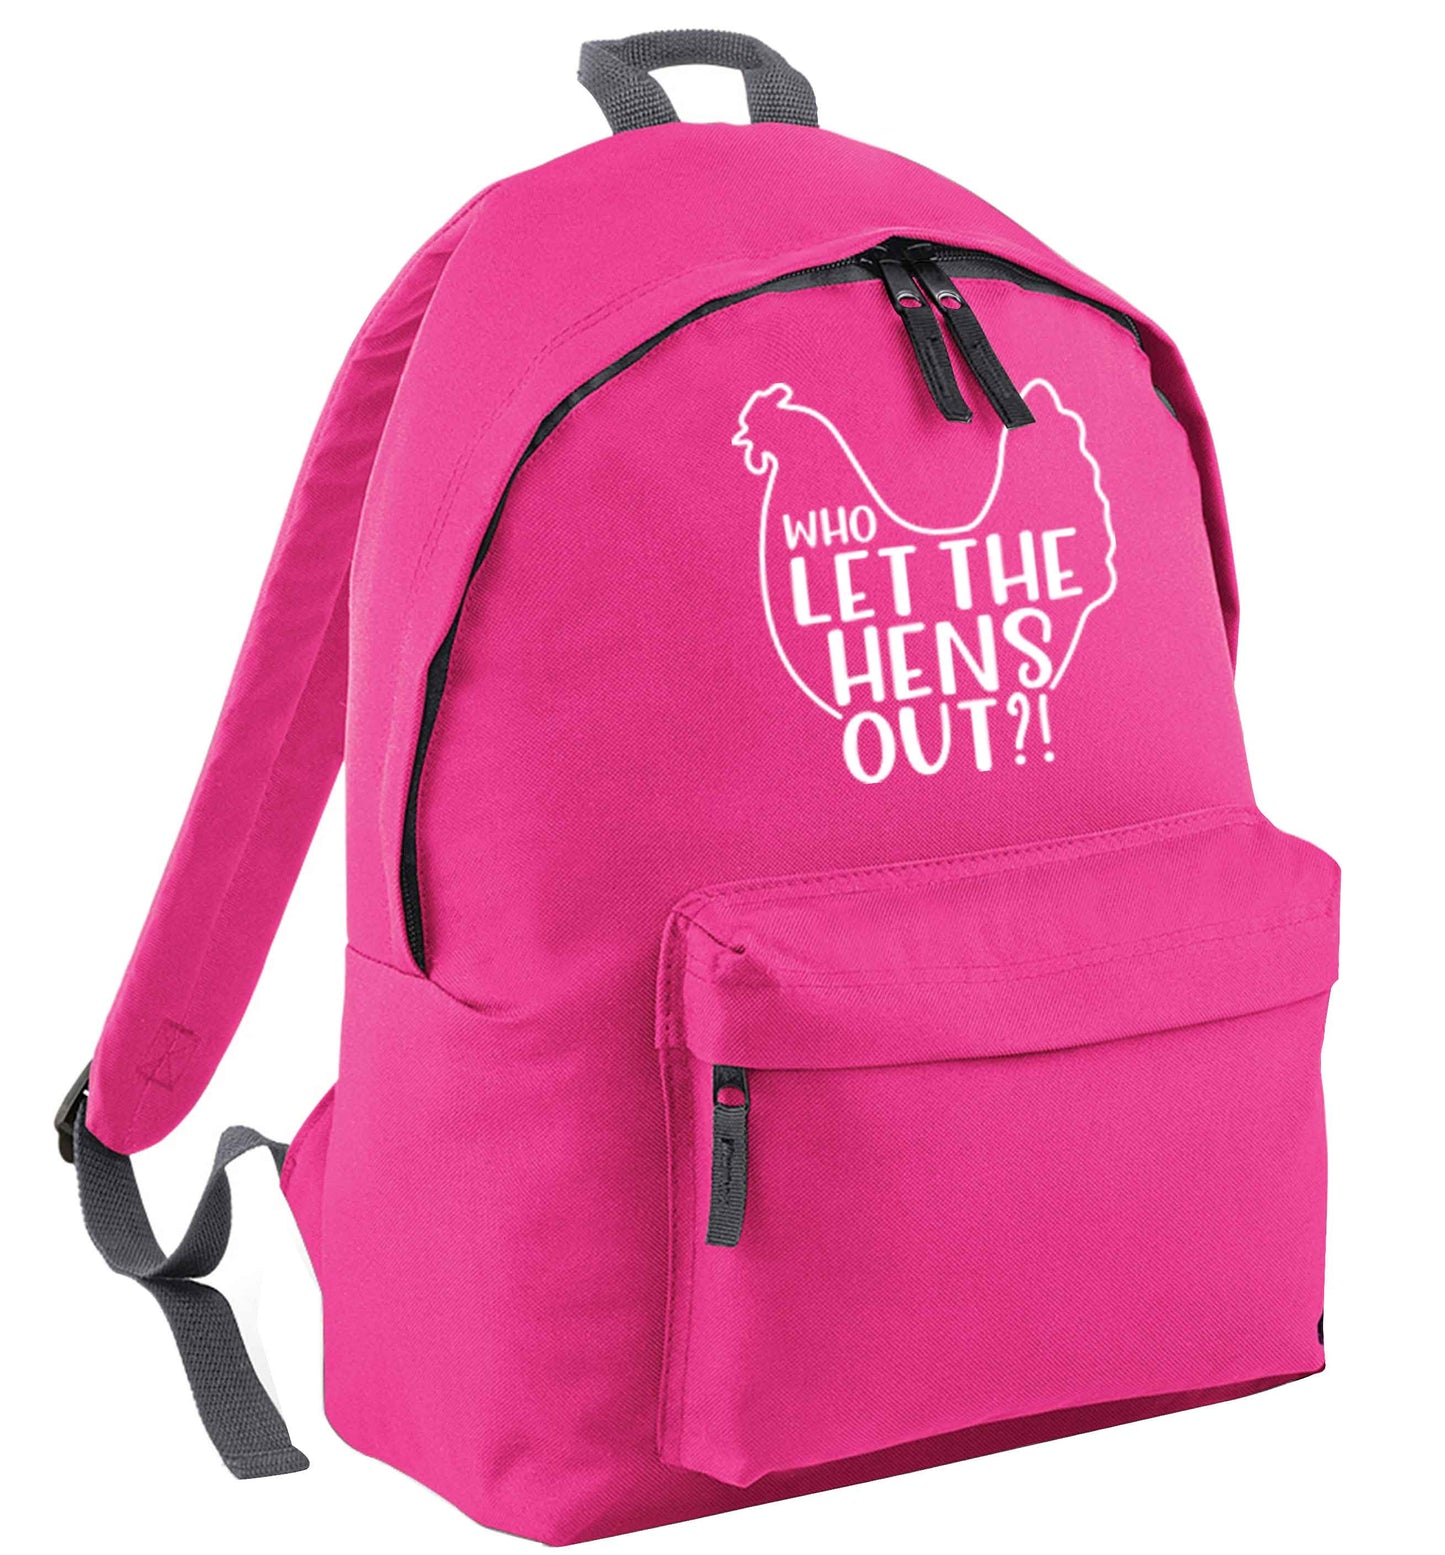 Who let the hens out pink adults backpack